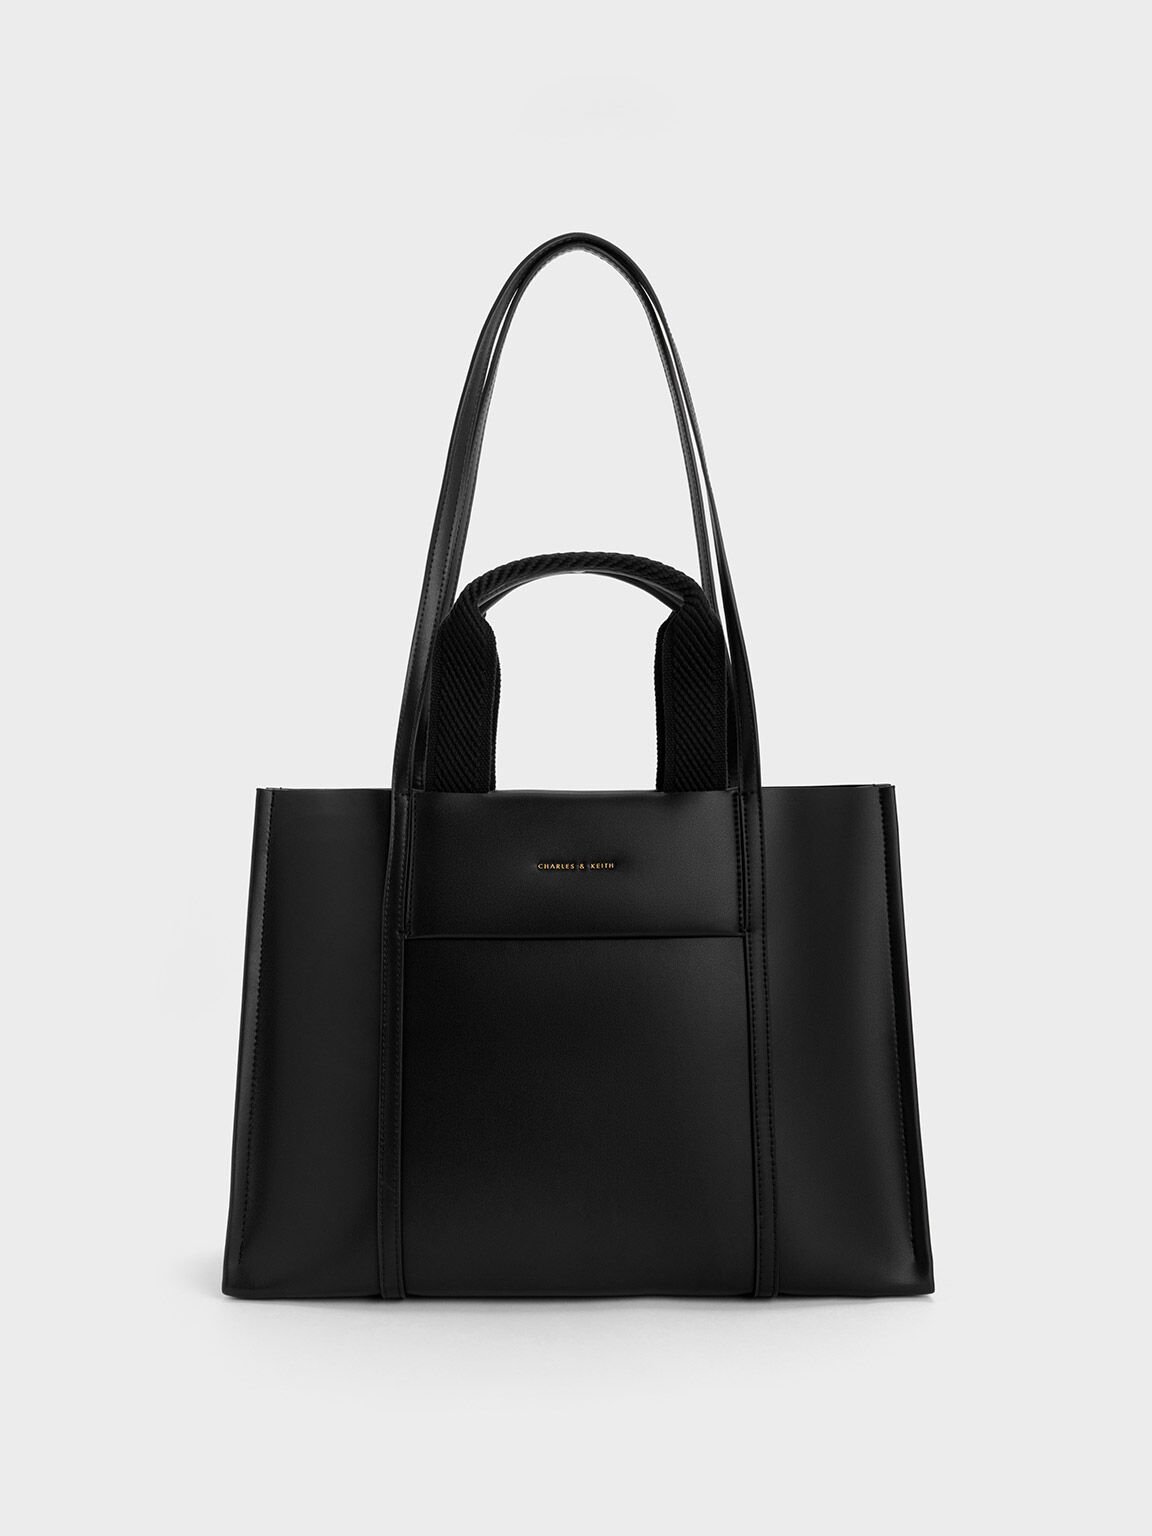 Shop Cln Kiarra Tote Bag with great discounts and prices online - Oct 2023